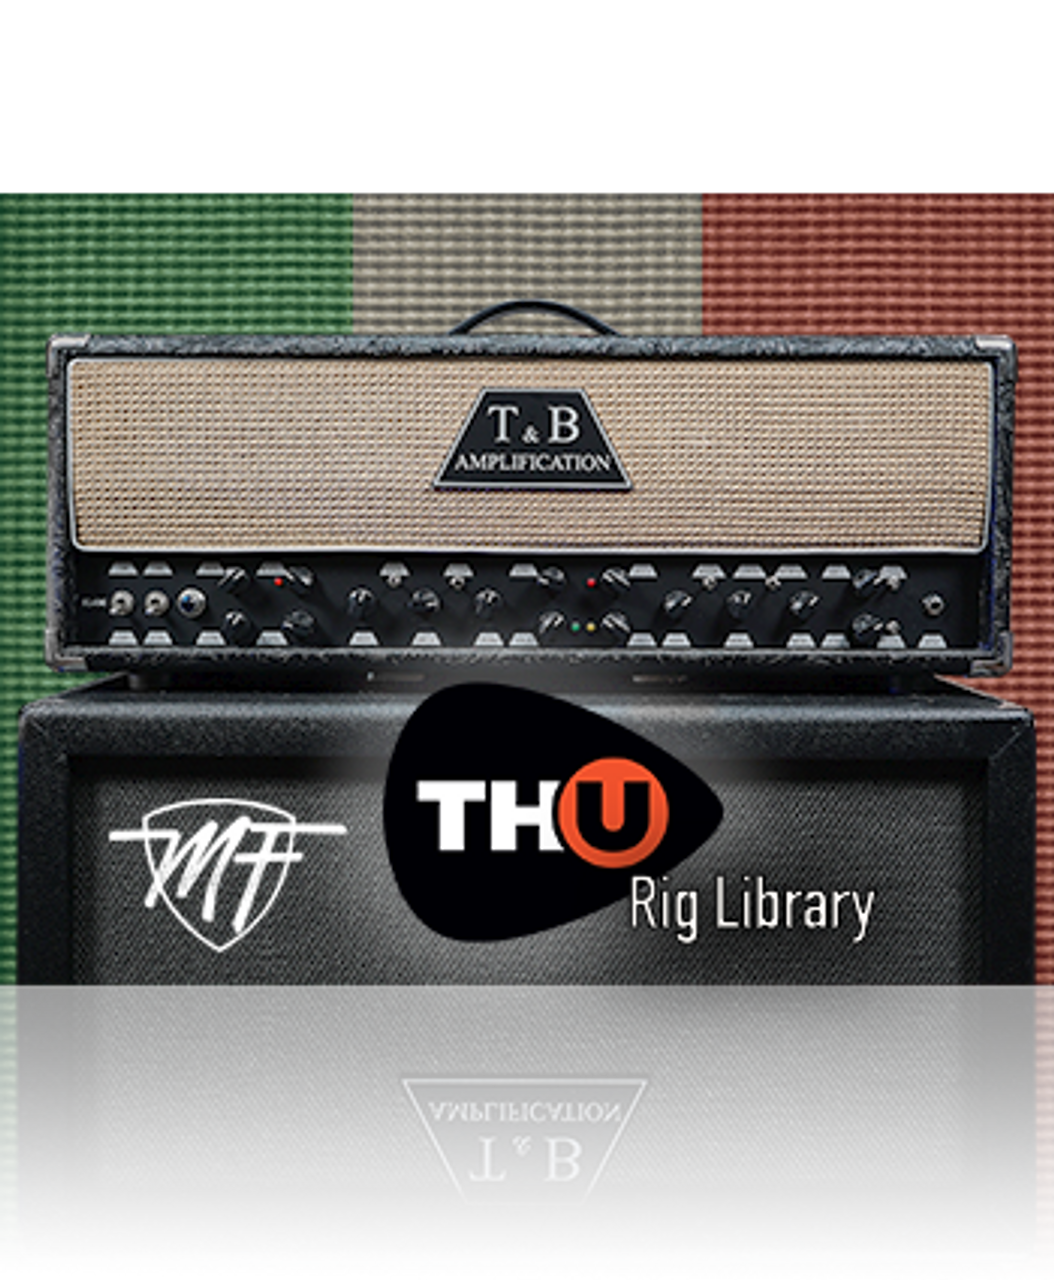 MF T&B 3Classic - Rig Library for TH-U